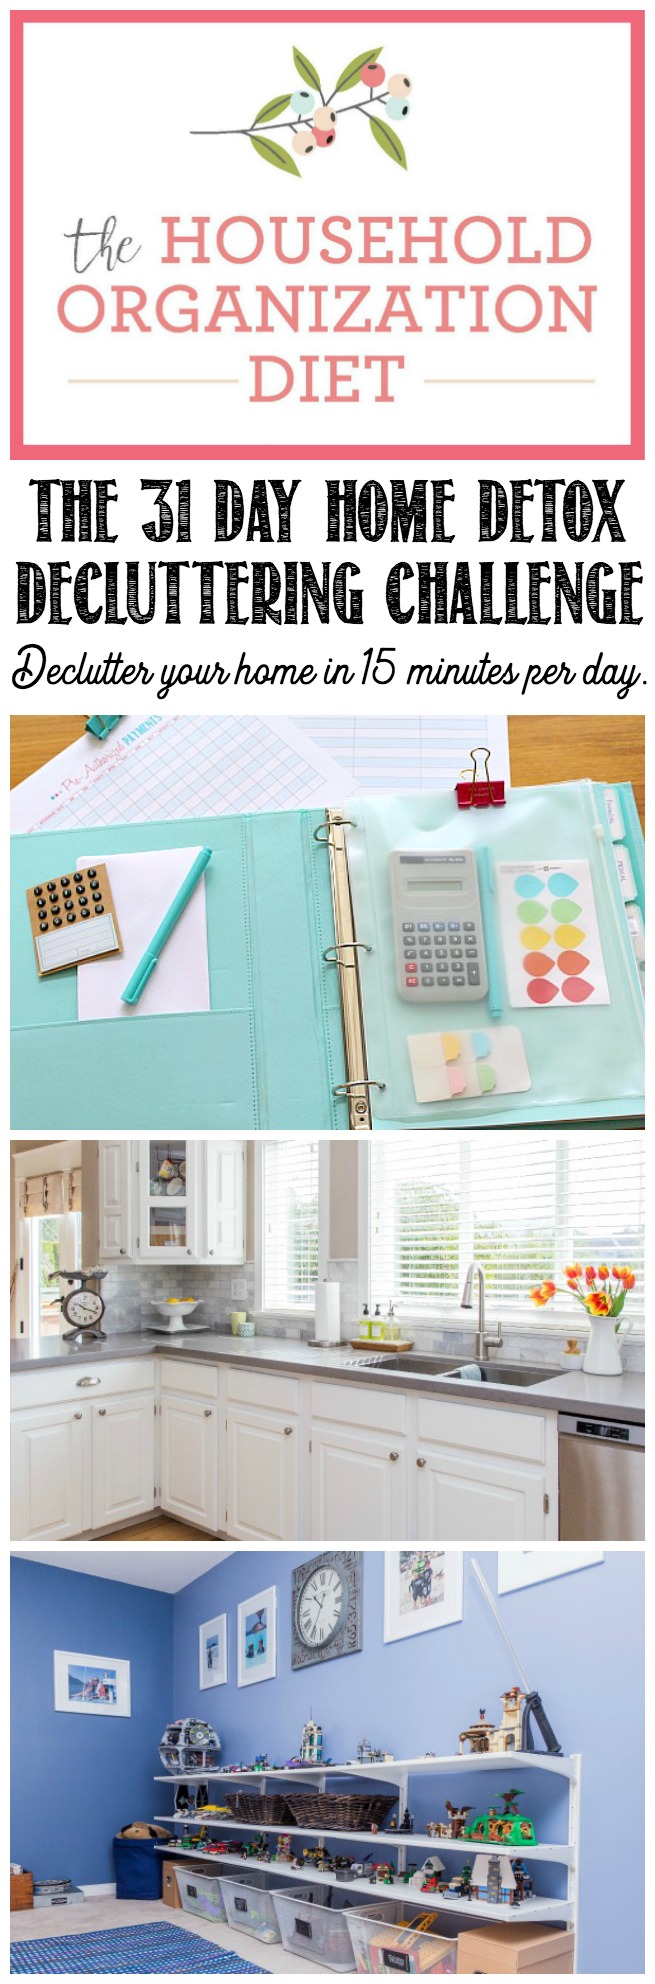 Jumpstart your home decluttering and organization with this 31 day home detox. Just 15 minutes per day to get rid of all of that unwanted stuff that's weighing you down! Start at any time! Free printables included.